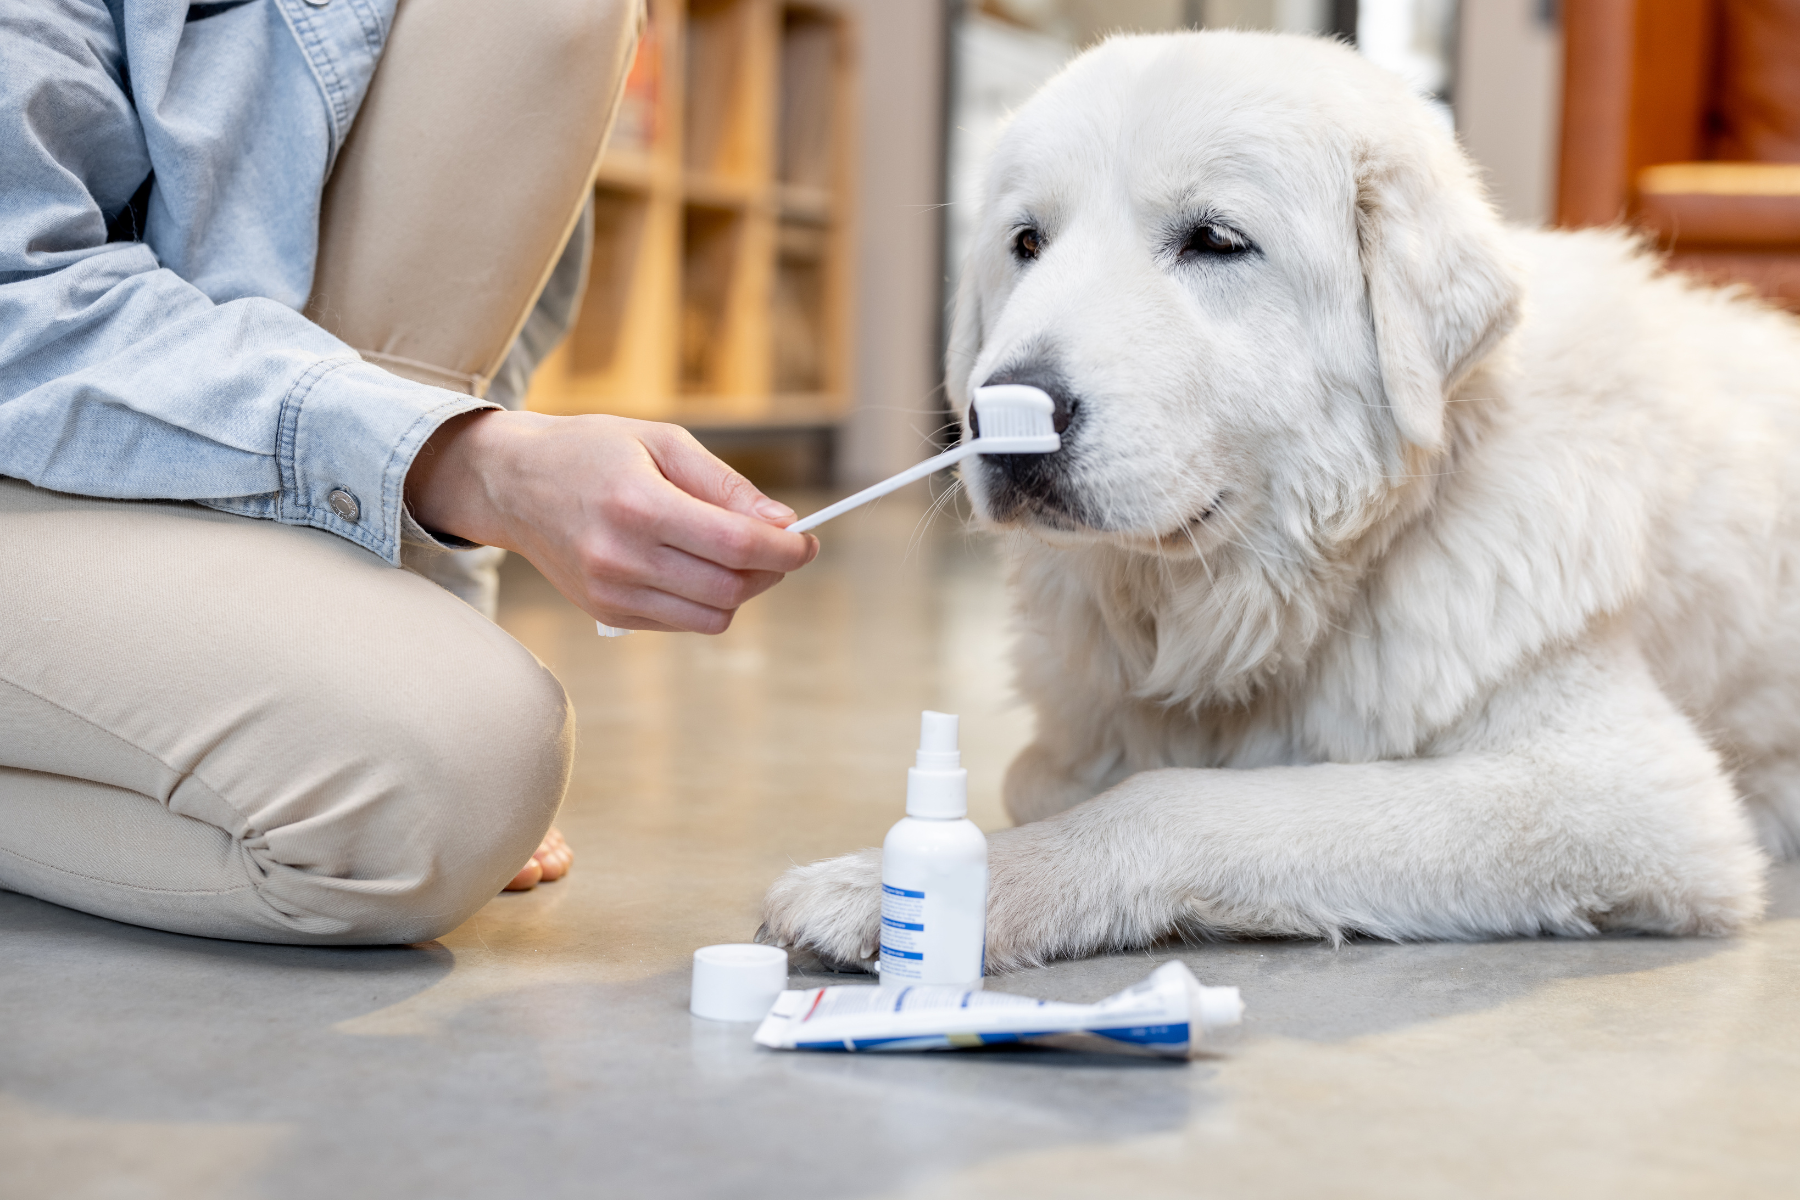 The Absolute Best Way to Clean Dogs’ Teeth